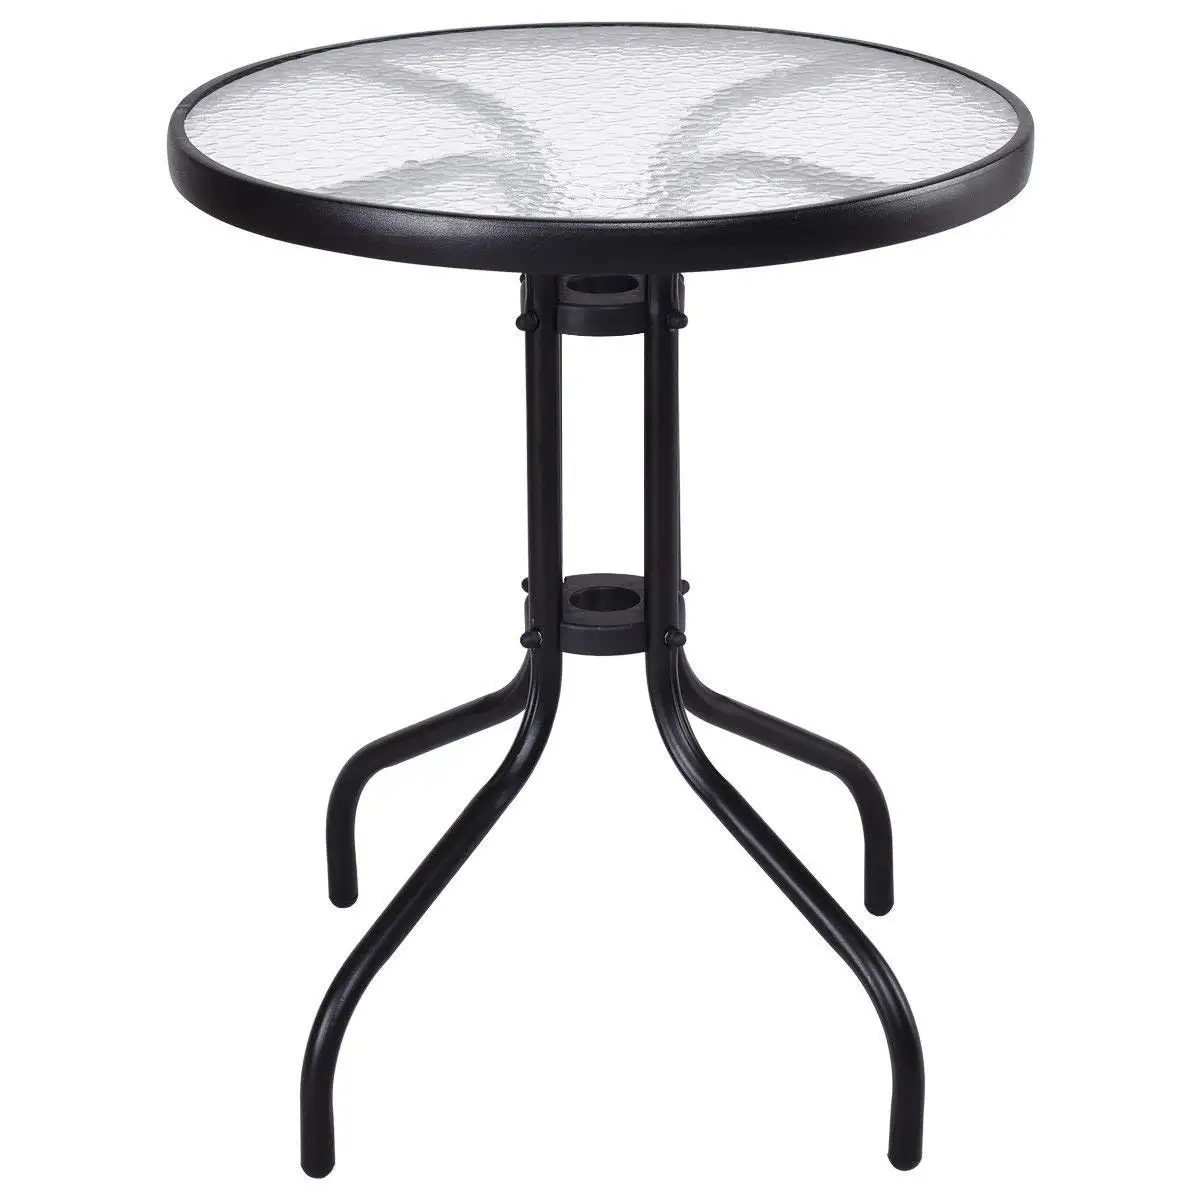 Cheap Small Round Glass Top Coffee Table Find Small Round Glass Top Coffee Table Deals On Line At Alibaba Com